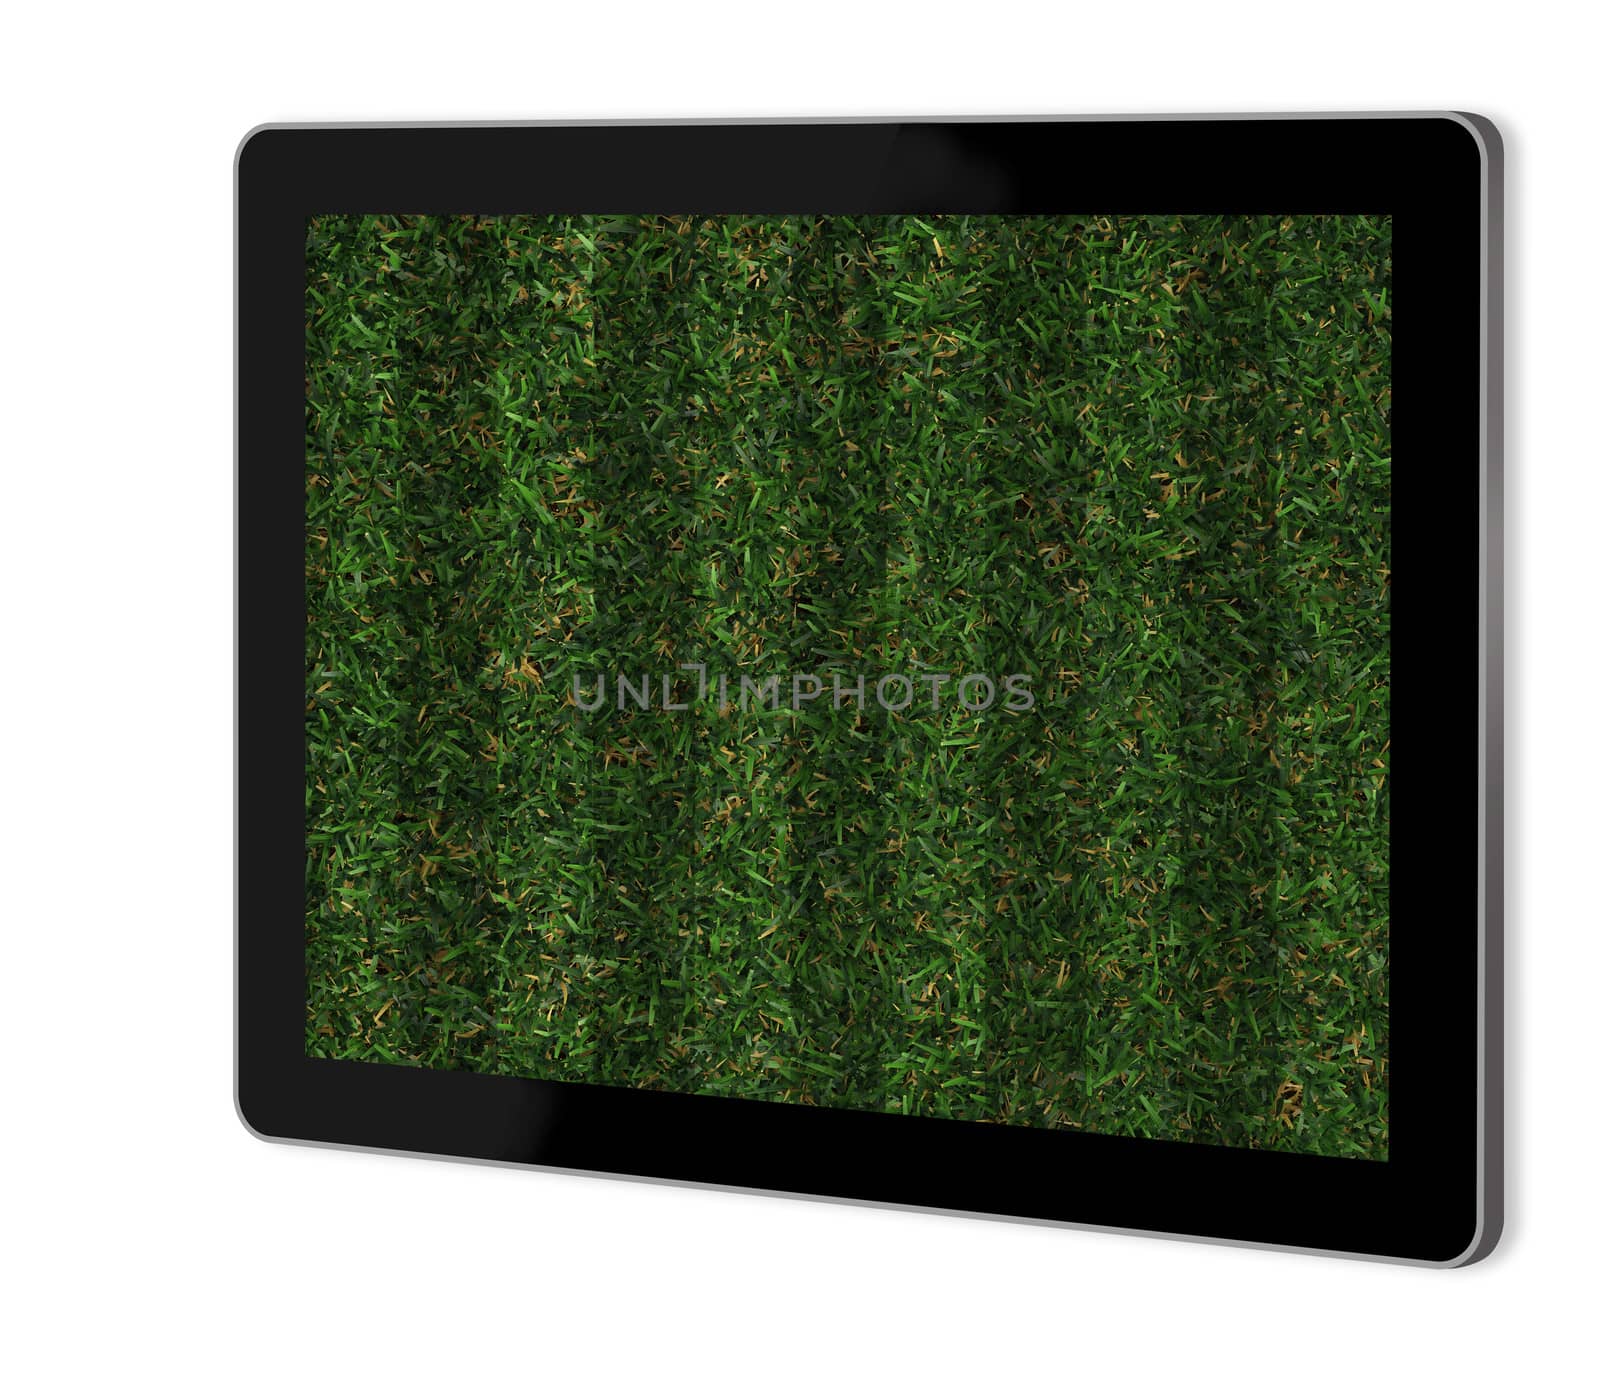 Perfect Grass on screen of tablet  made in 3d software